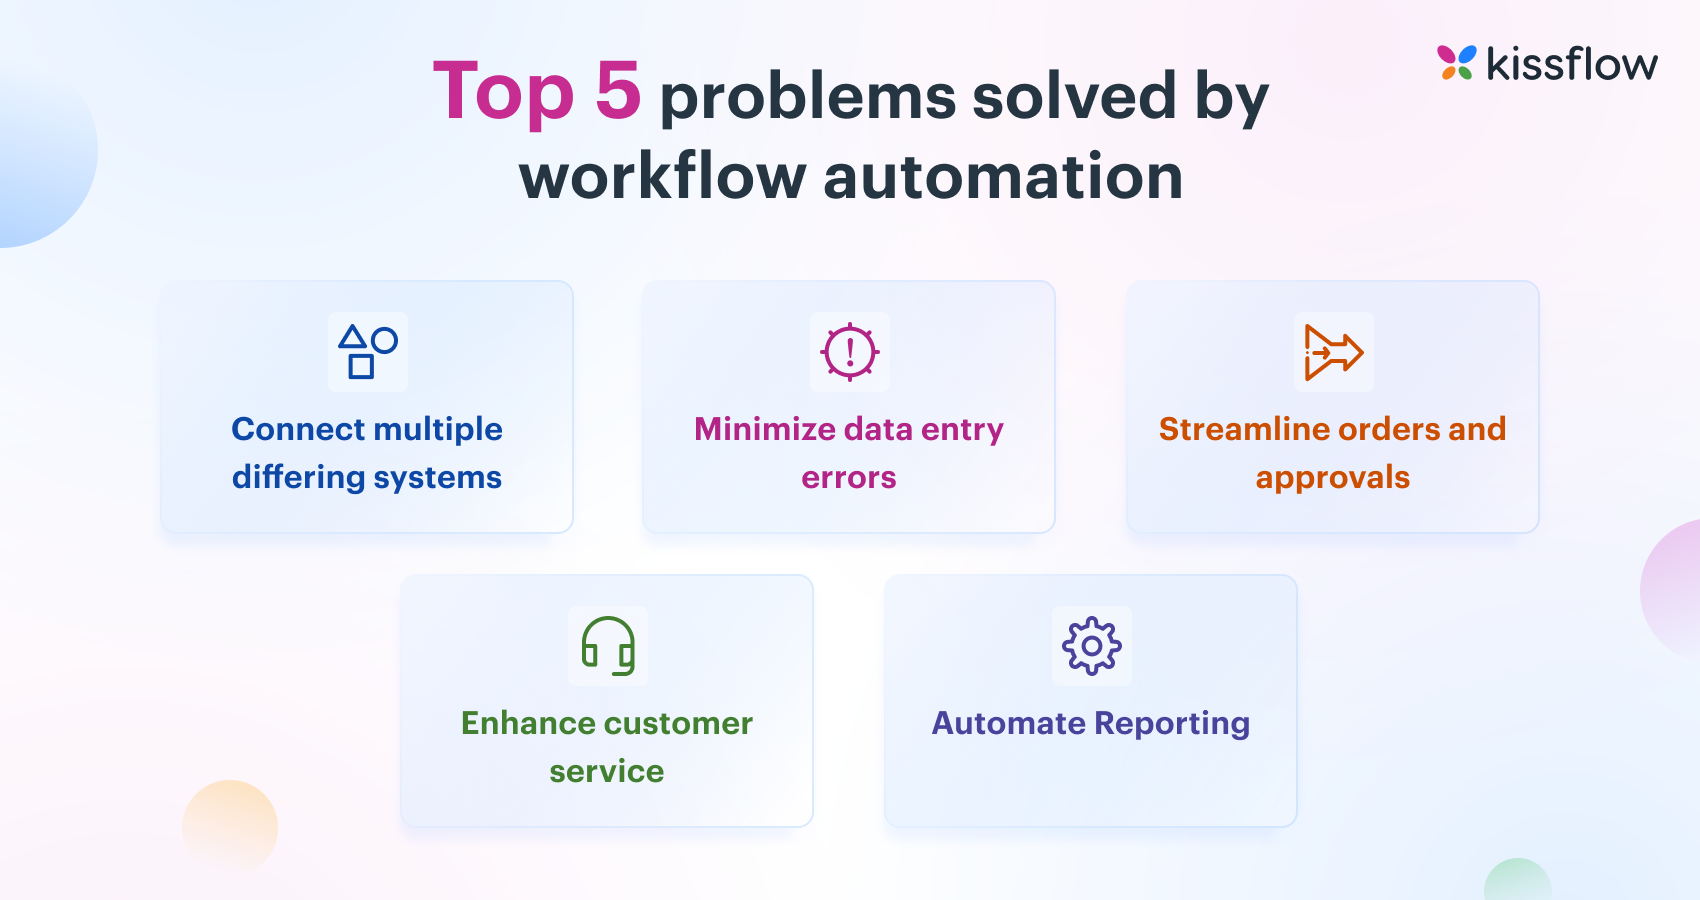 Top 5 Problems Solved by Workflow Automation in any organization